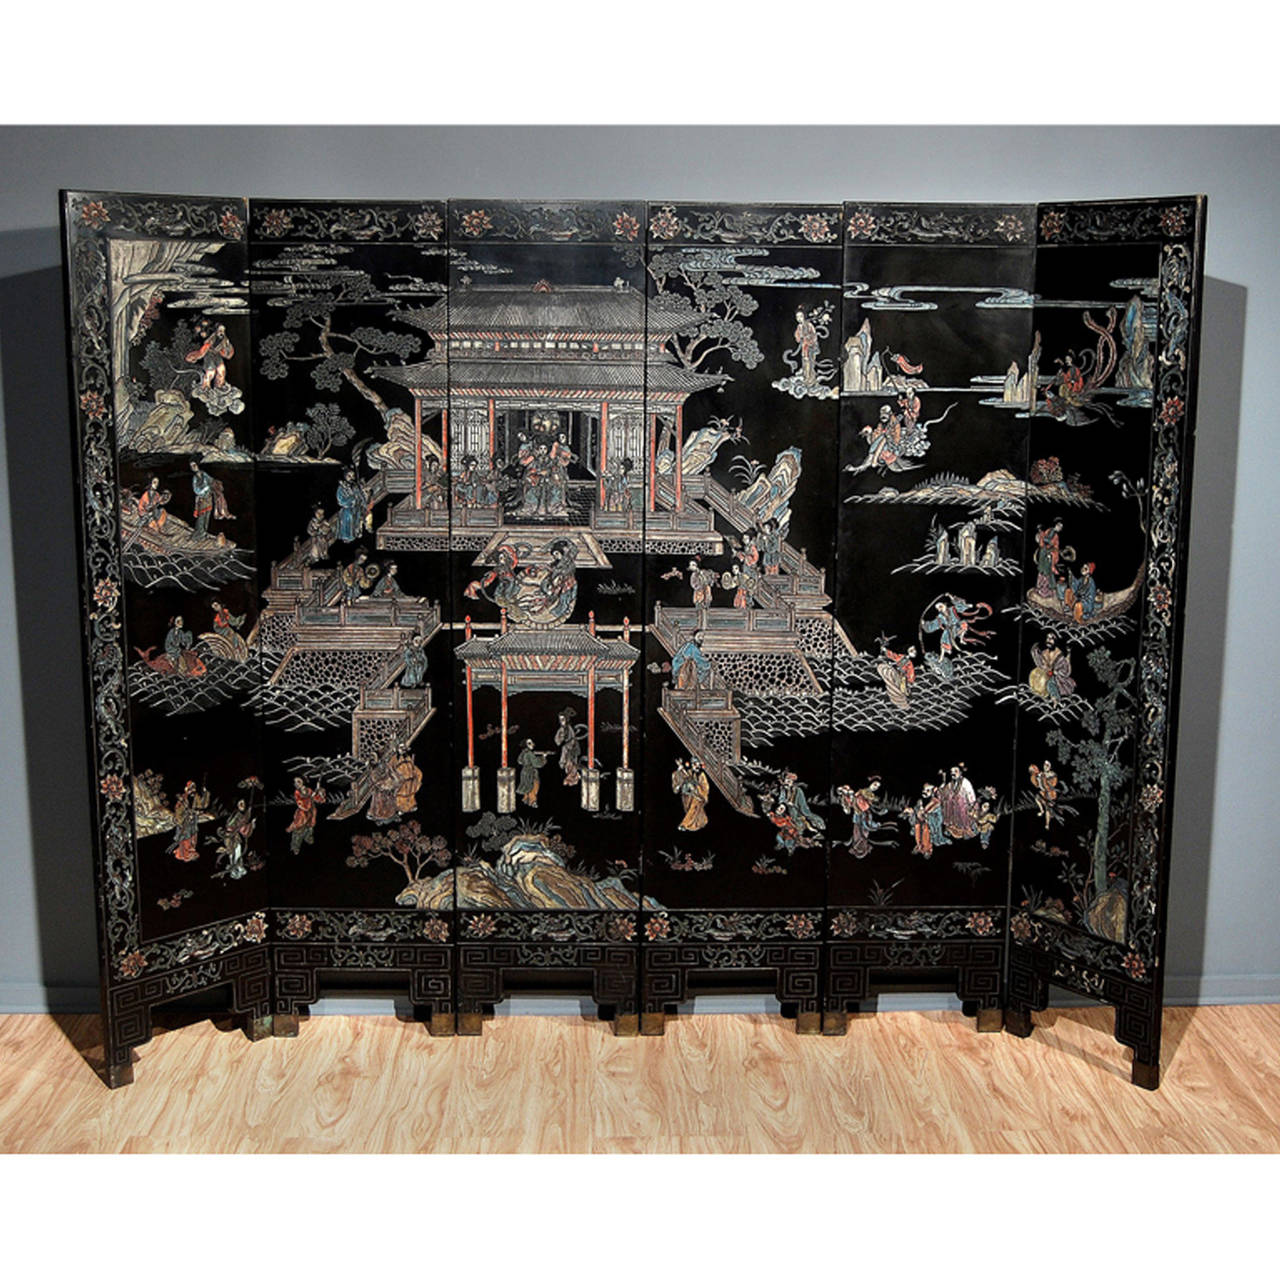 A Six Panel Black Lacquer Cormorandel Screen with Polychrome Decoration Depicting An Empress in A Seaside Pavillion Surrounded by Dieties and Attendents Carrying Auspicious Objects. Chinese, Circa Late 19th Early 20th Century.